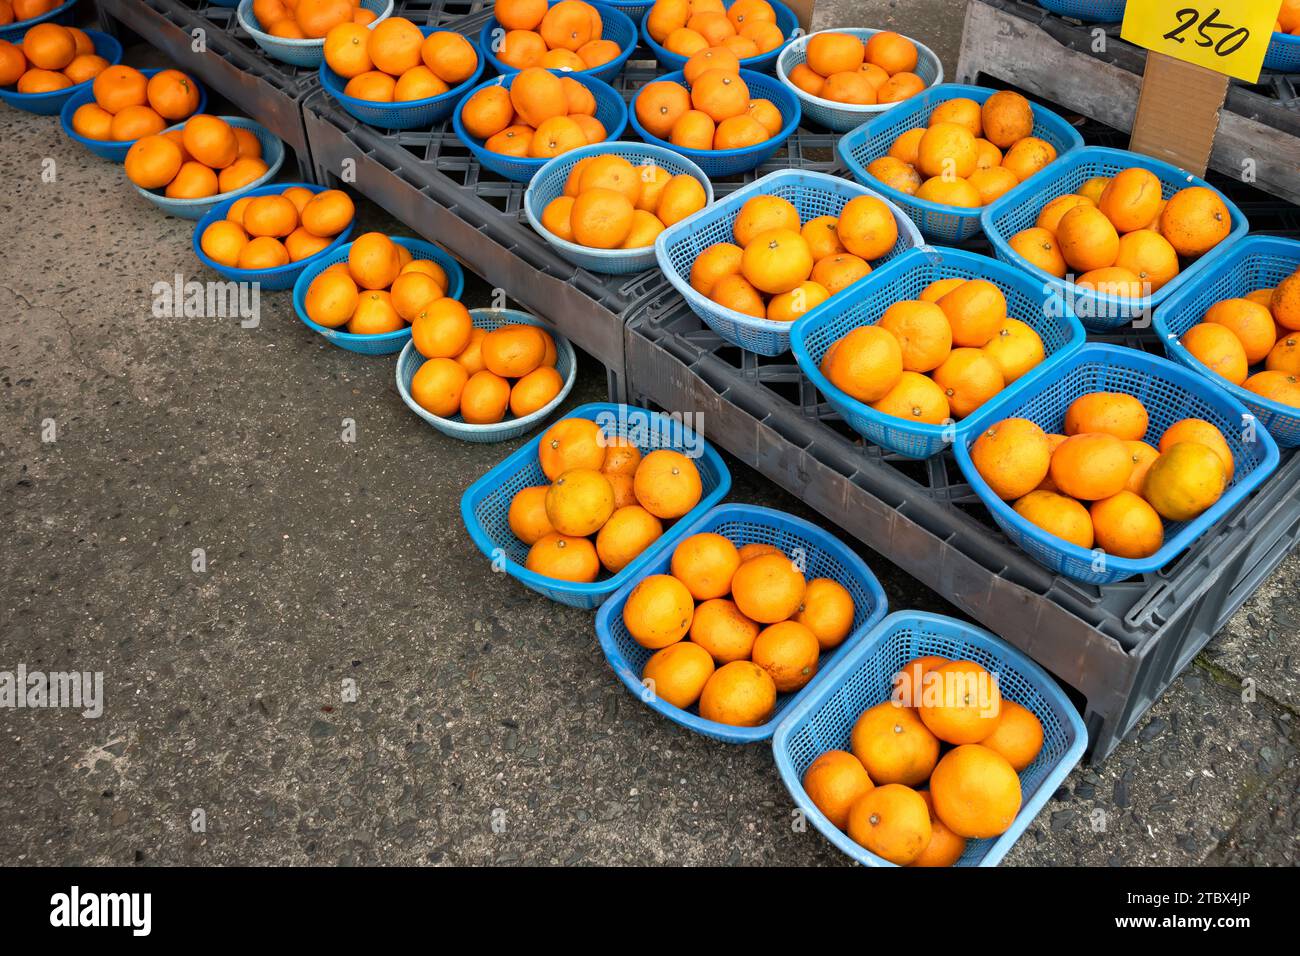 Bunch of oranges in baskets sold at a local street market in Japan. Stock Photo